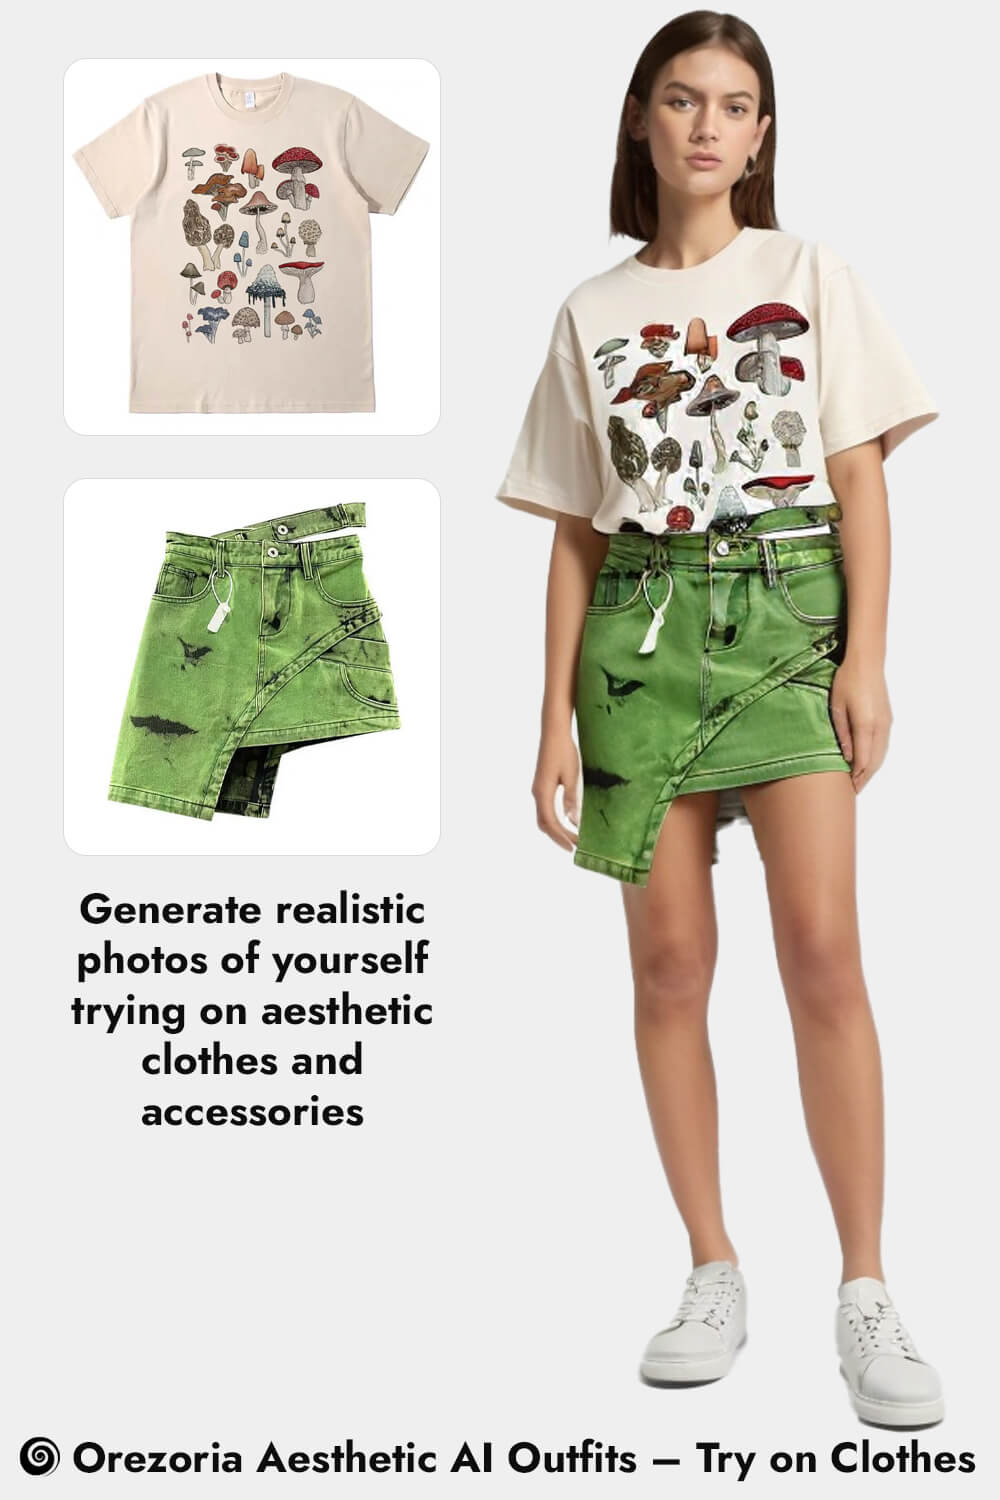 Orezoria Aesthetic AI Outfits – Try on Clothes Mushroom Collection Collage Fairy Grunge T Shirt Unisex Grunge Asymmetric Edgy Tie Dye Green Denim Women Skirt